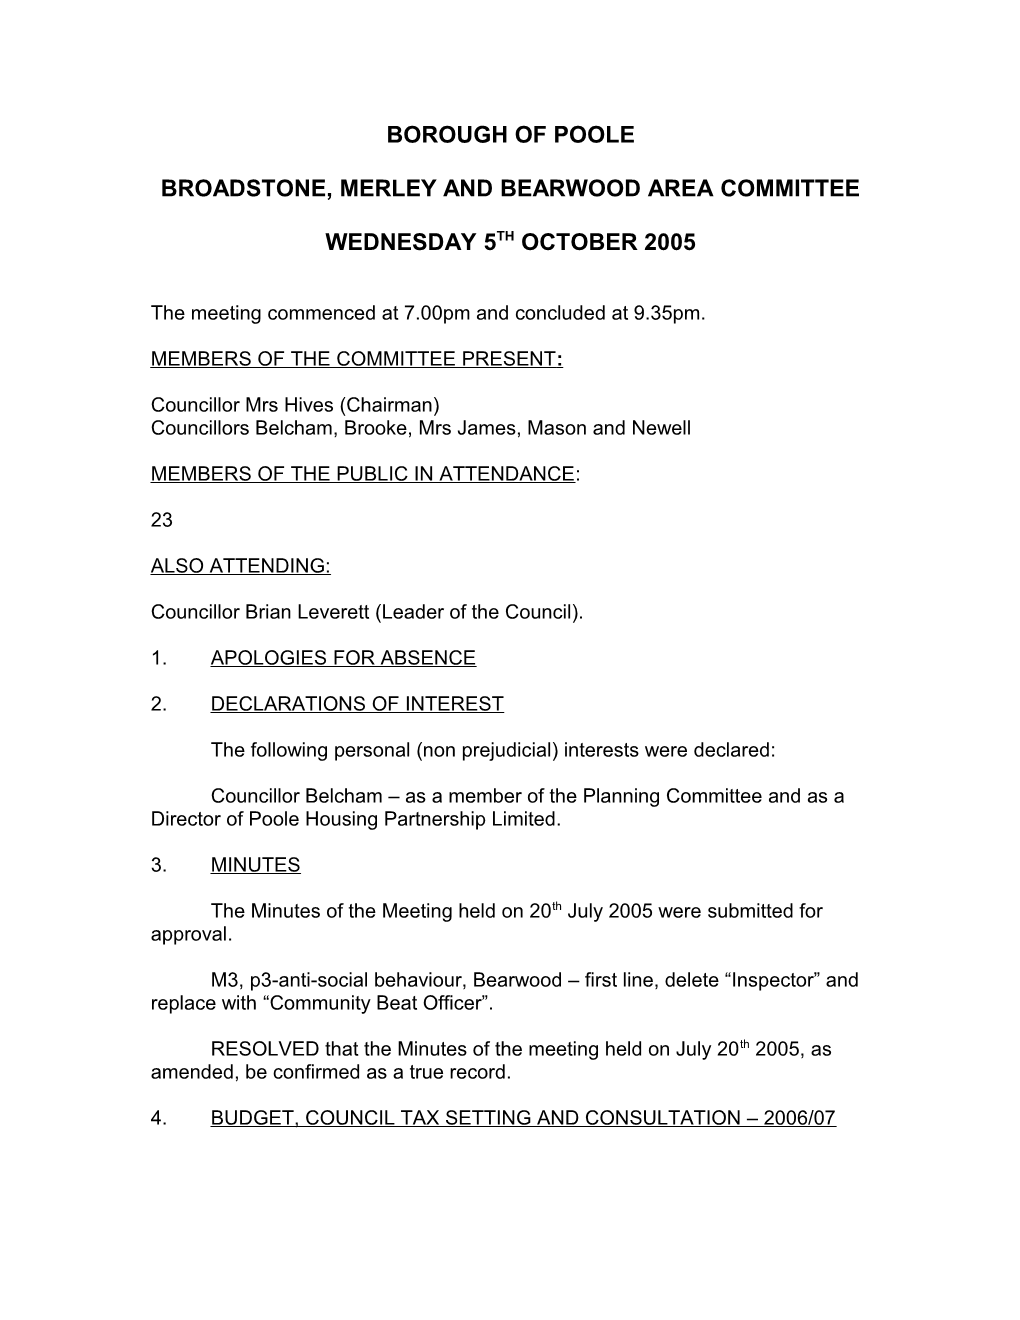 Minutes - BROADSTONE, MERLEY and BEARWOOD AREA COMMITTEE - 5 October 2005